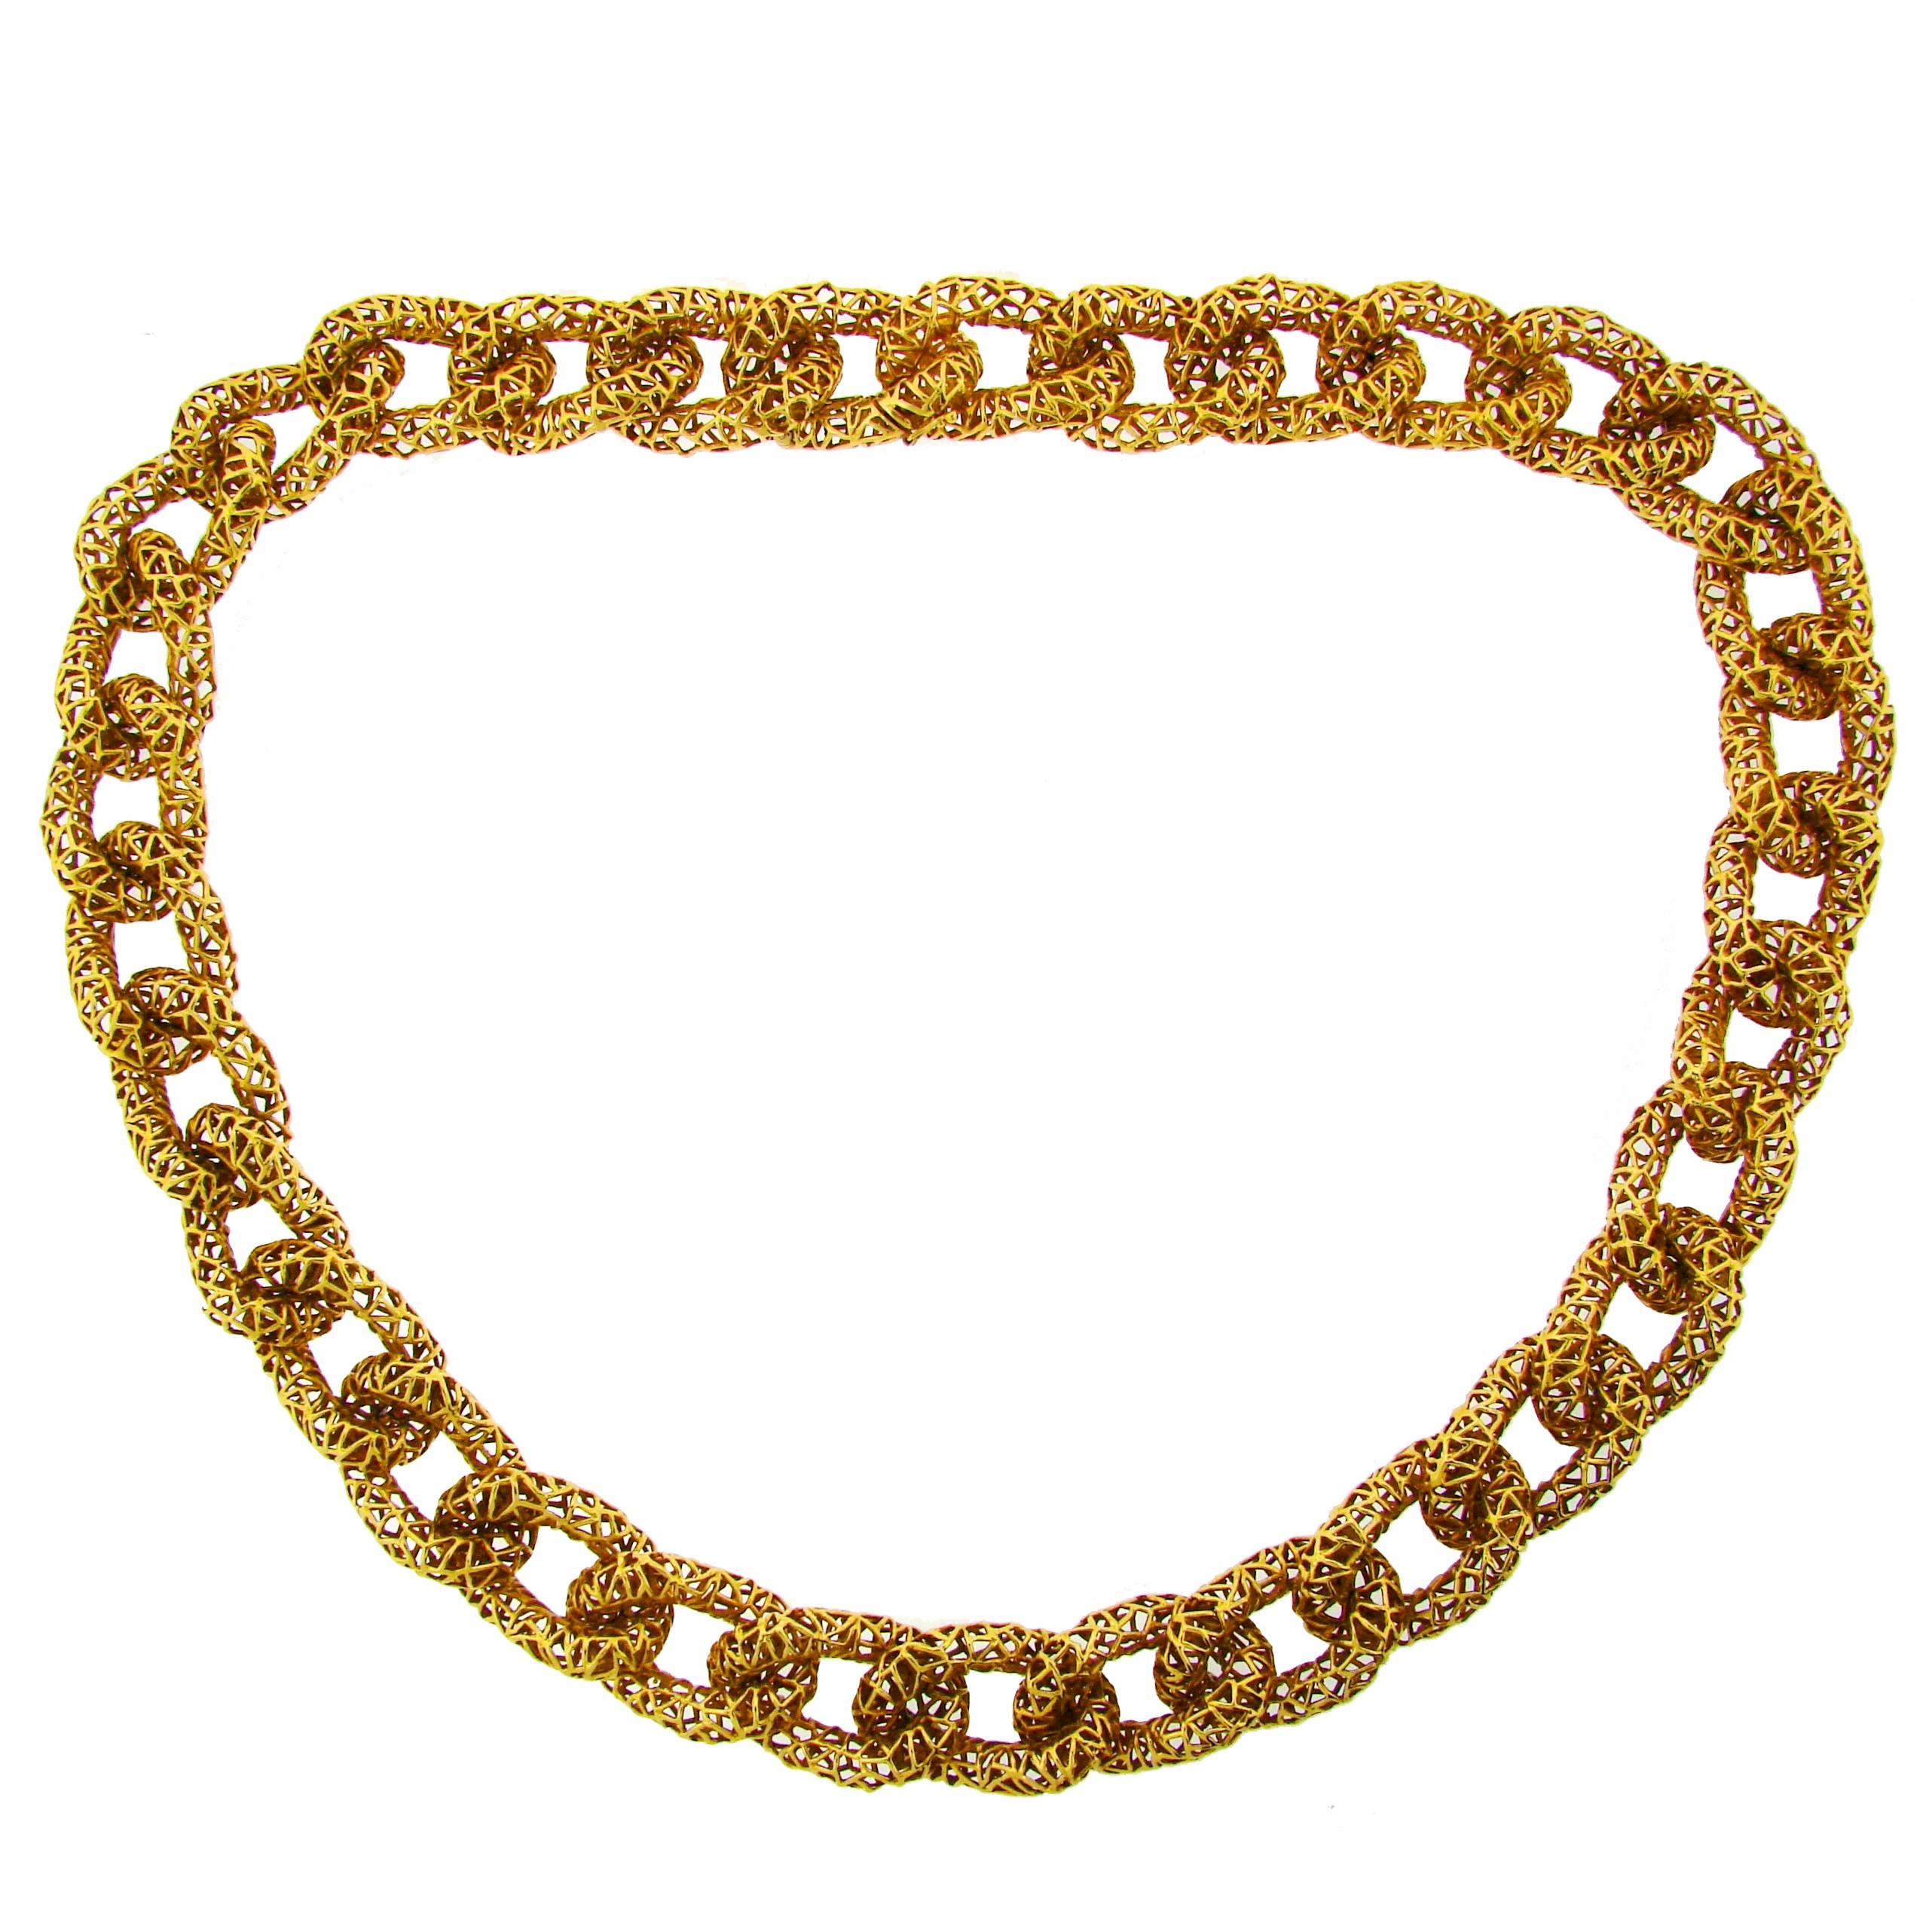 1980s Tiffany & Co. Gold Openwork Massive Chain Link Necklace